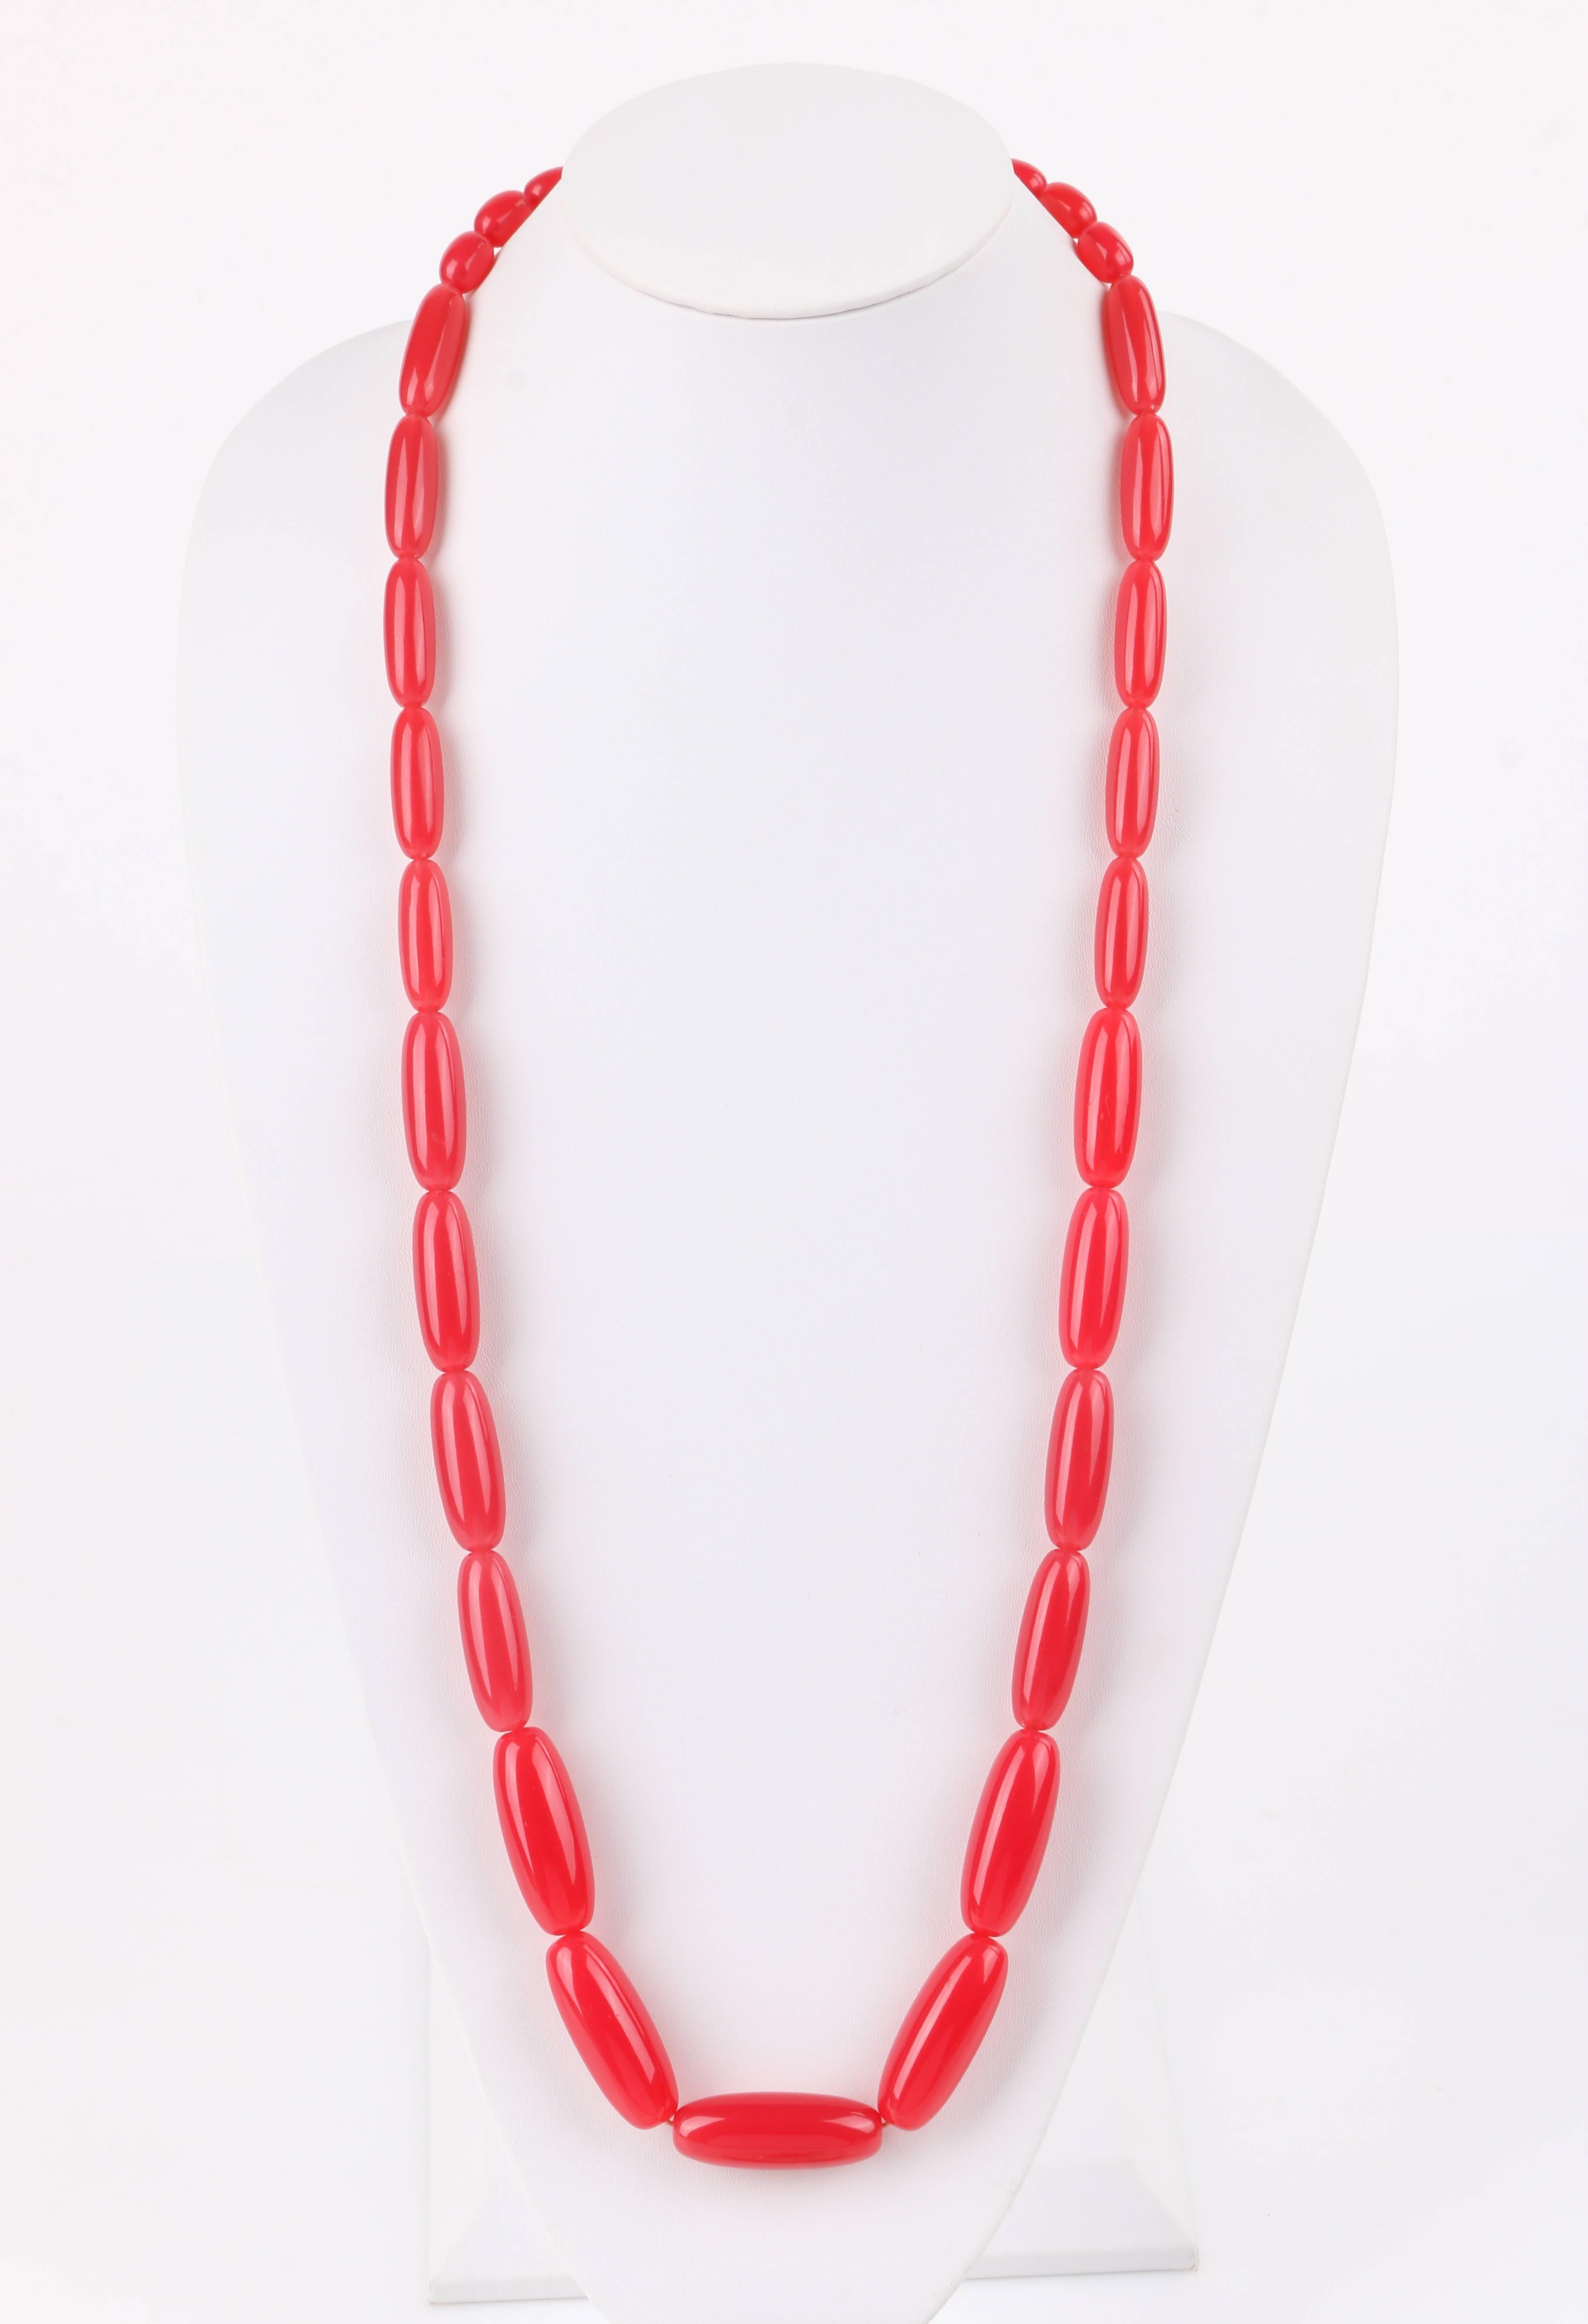 Vintage c.1940's watermelon pink oblong beaded long lucite necklace. Single long beaded strand made up of multiple oblong shaped lucite beads ascending in size (14 mm - 40 mm). Necklace has no fastener as it is a slip-on style. Piece is unmarked.